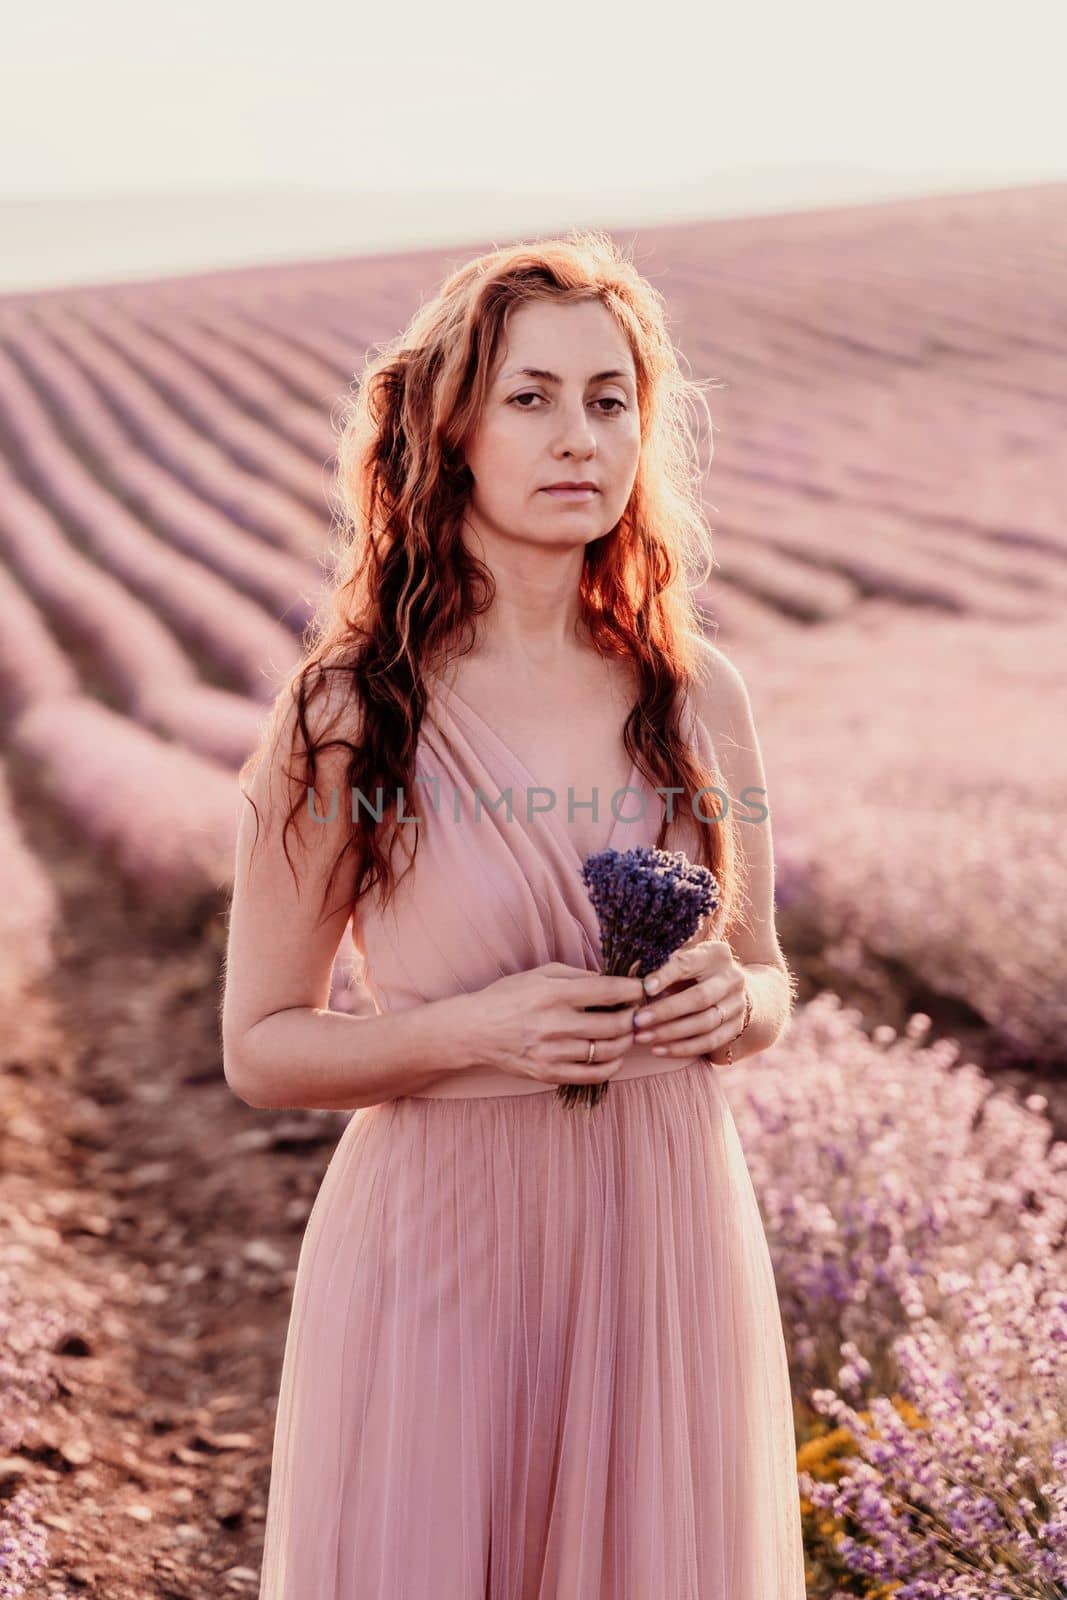 Woman lavender field sunset. Romantic woman walks through the lavender fields. illuminated by sunset sunlight. She is wearing a pink dress with